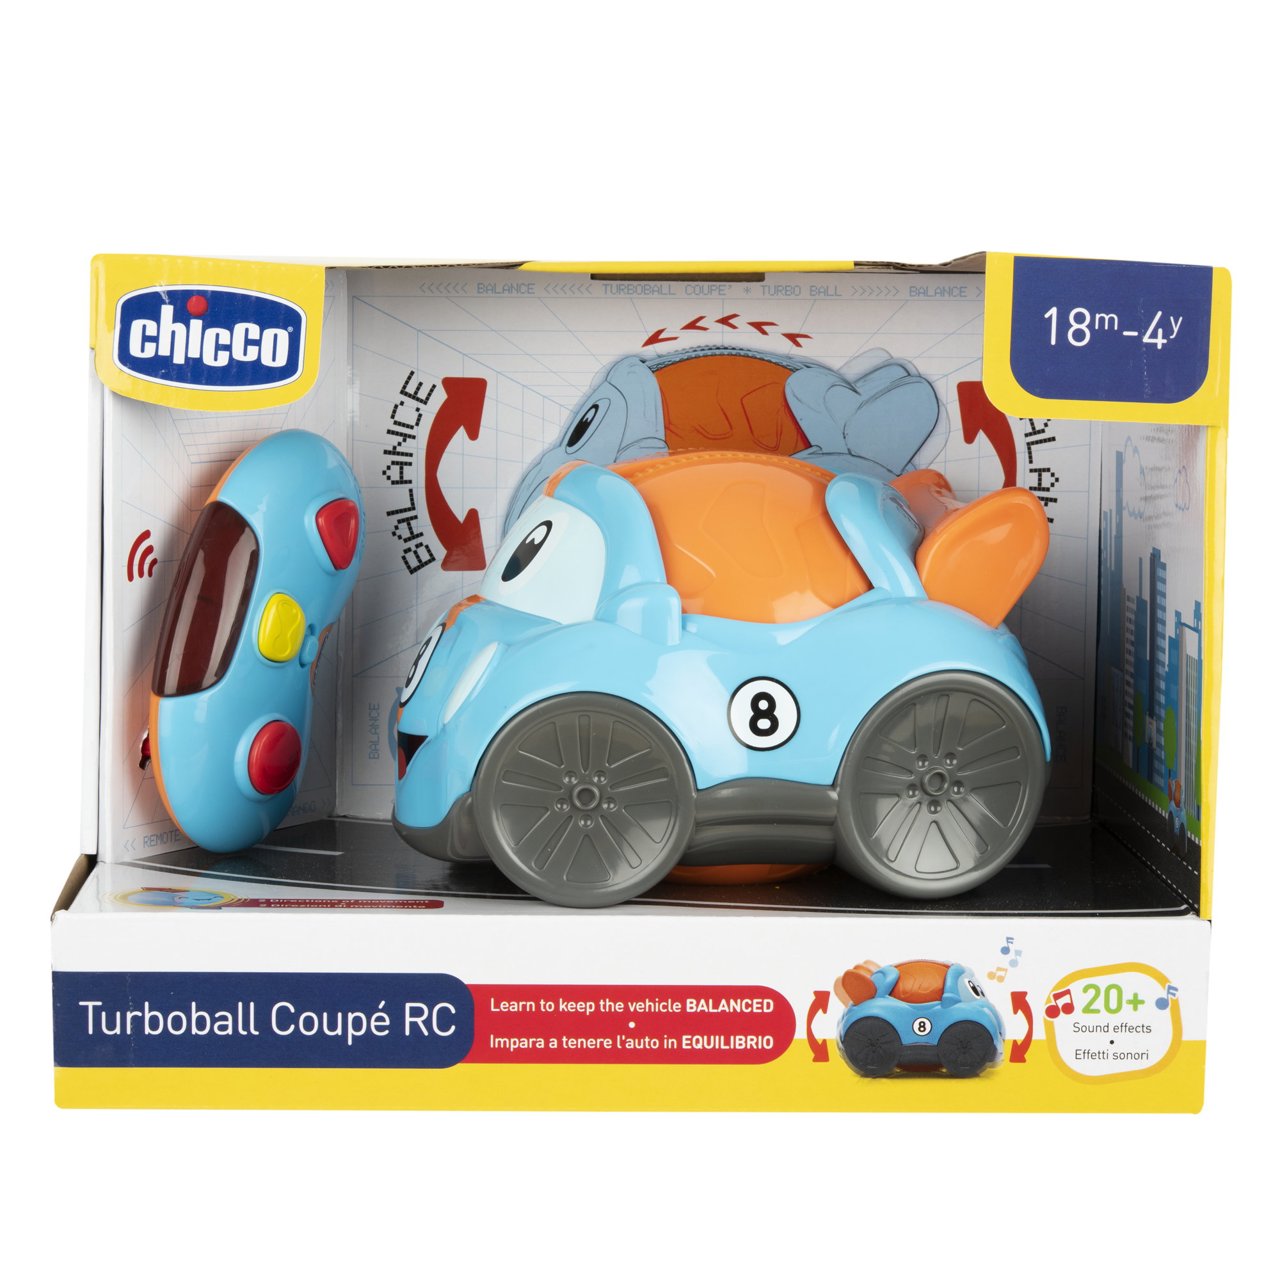 Turboball Coupé RC image number 9